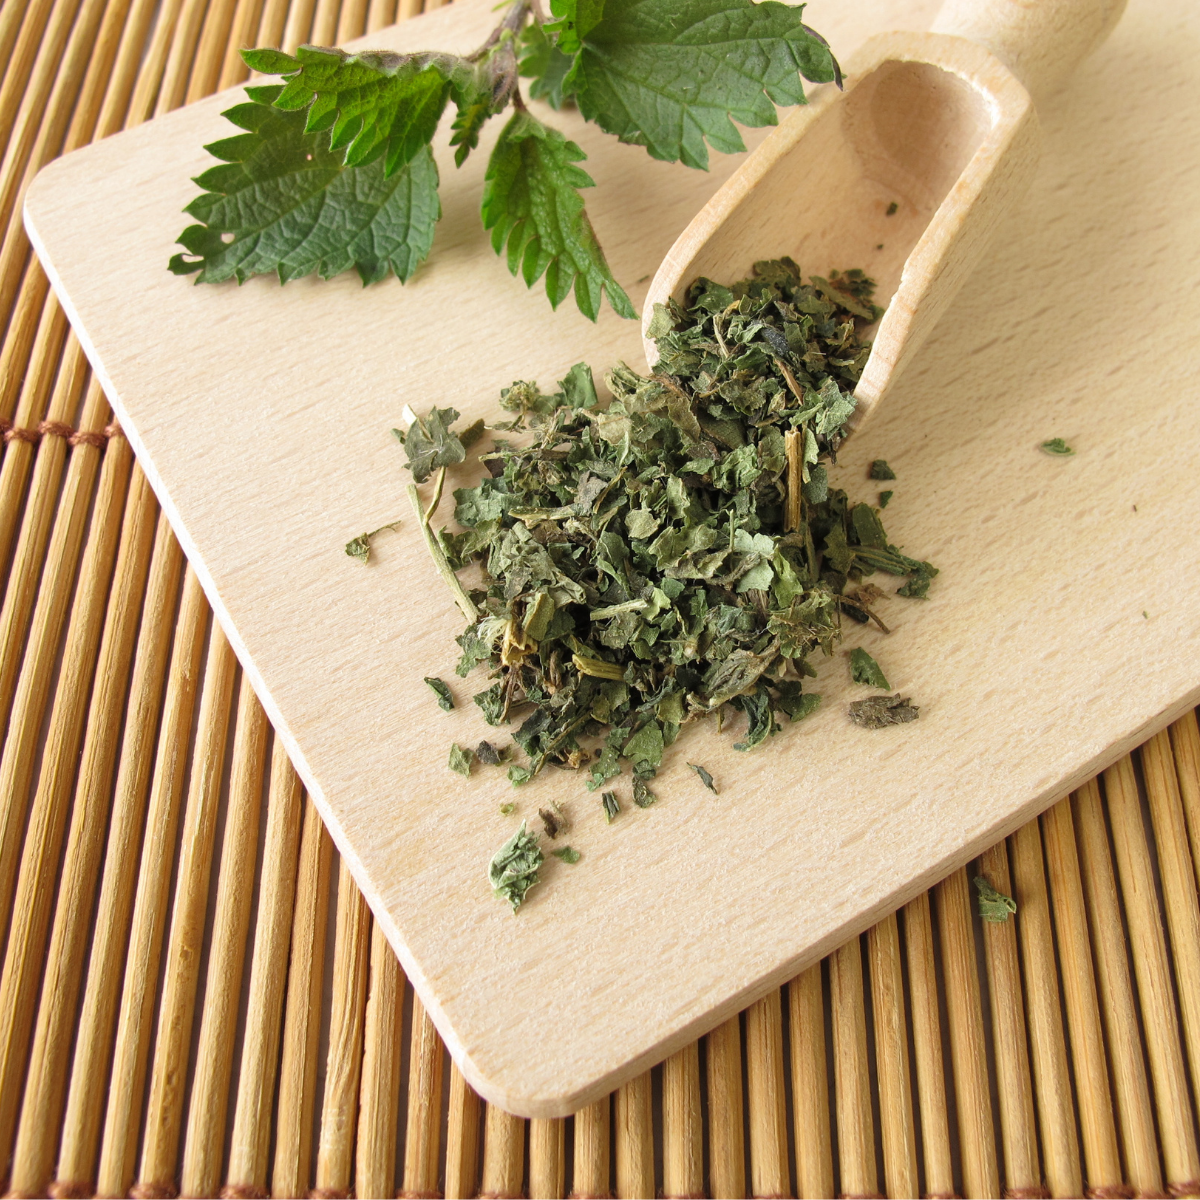 Topical use of nettle leaf extract or creams may help with certain skin conditions, such as eczema and dermatitis,